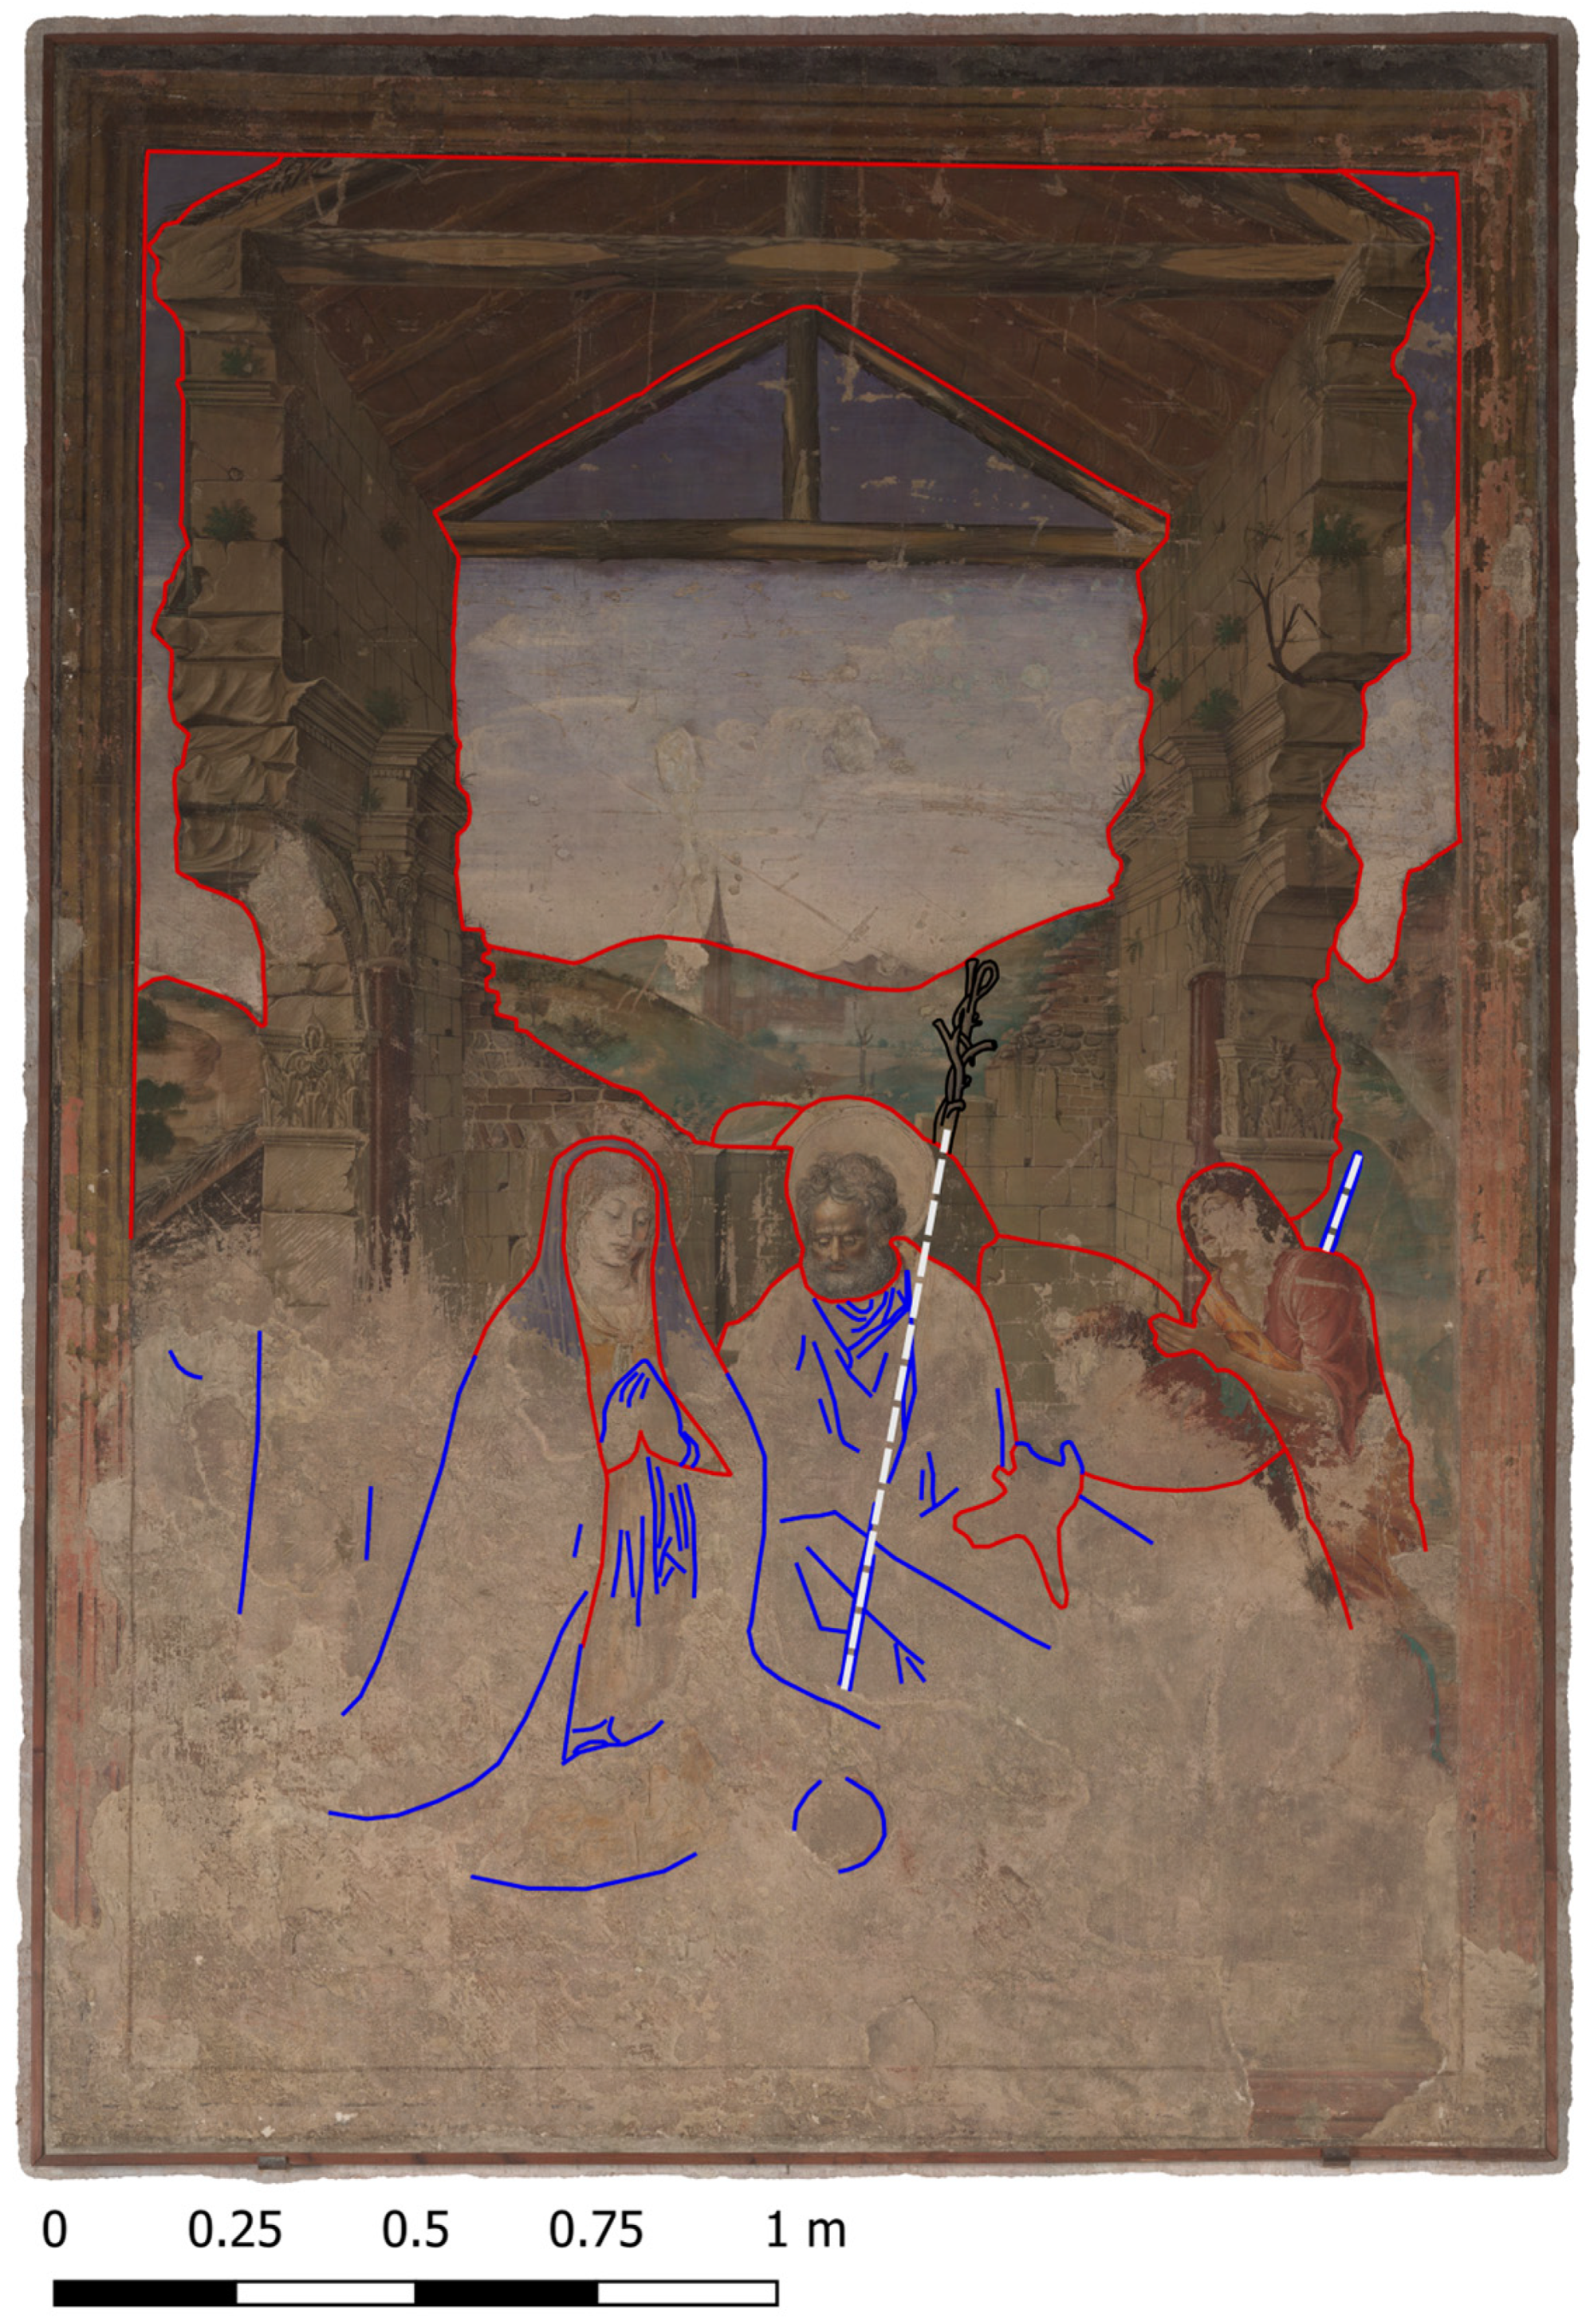 Sensors | Free Full-Text | Multiband Photogrammetry and Hybrid Image  Analysis for the Investigation of a Wall Painting by Paolo de San Leocadio  and Francesco Pagano in the Cathedral of Valencia